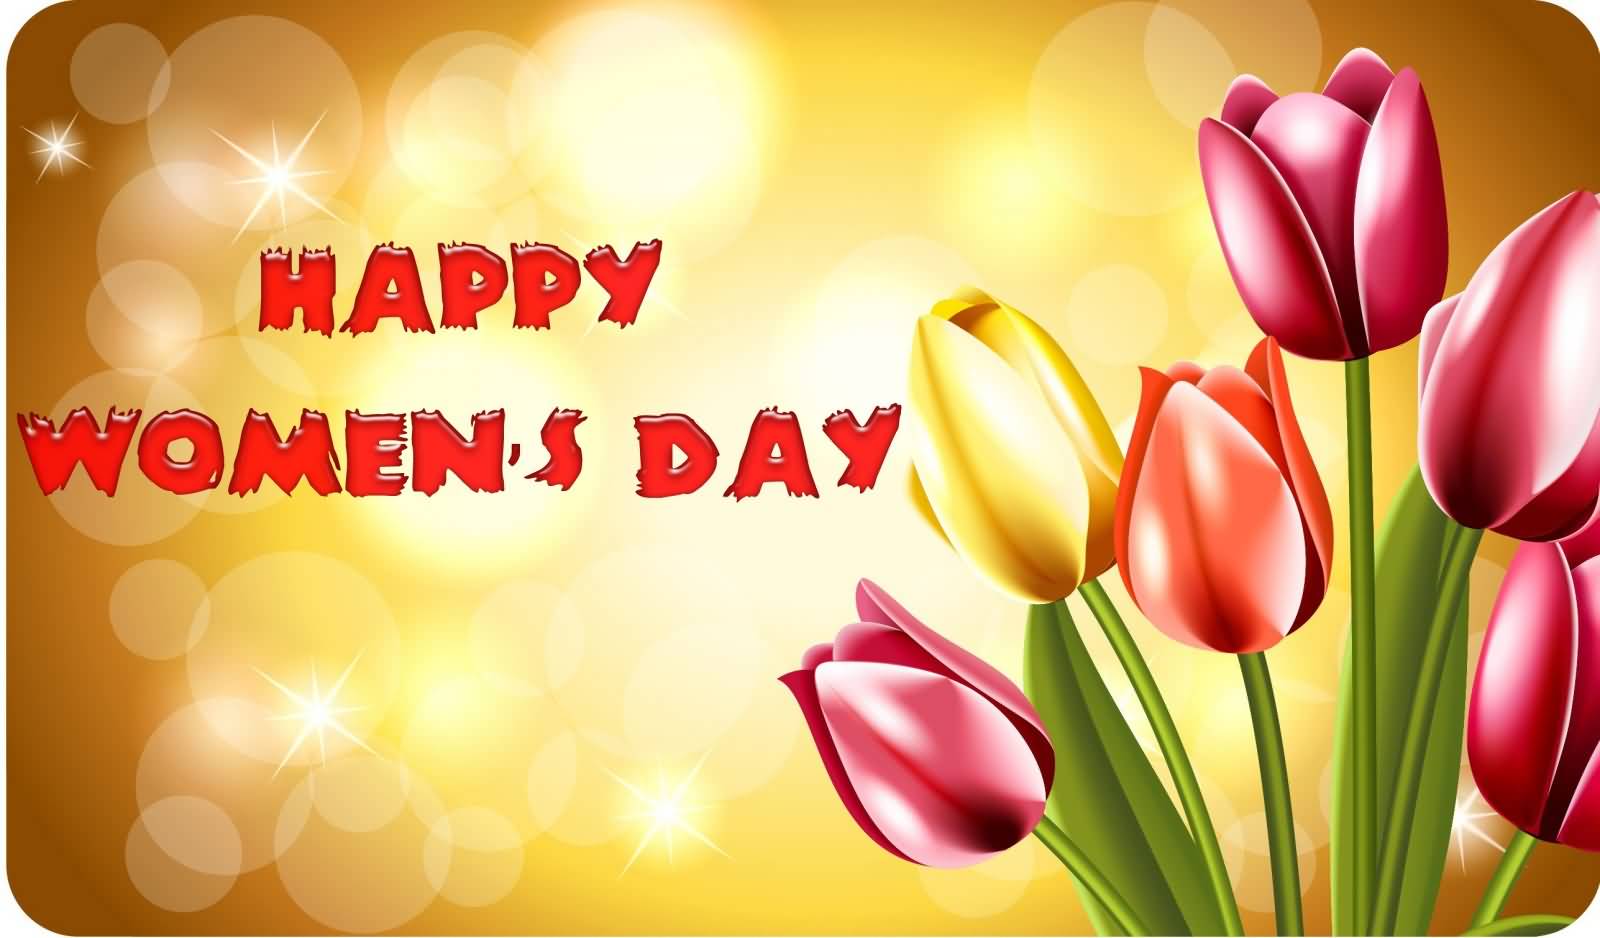 Happy Women's Day Tulip Flowers Picture